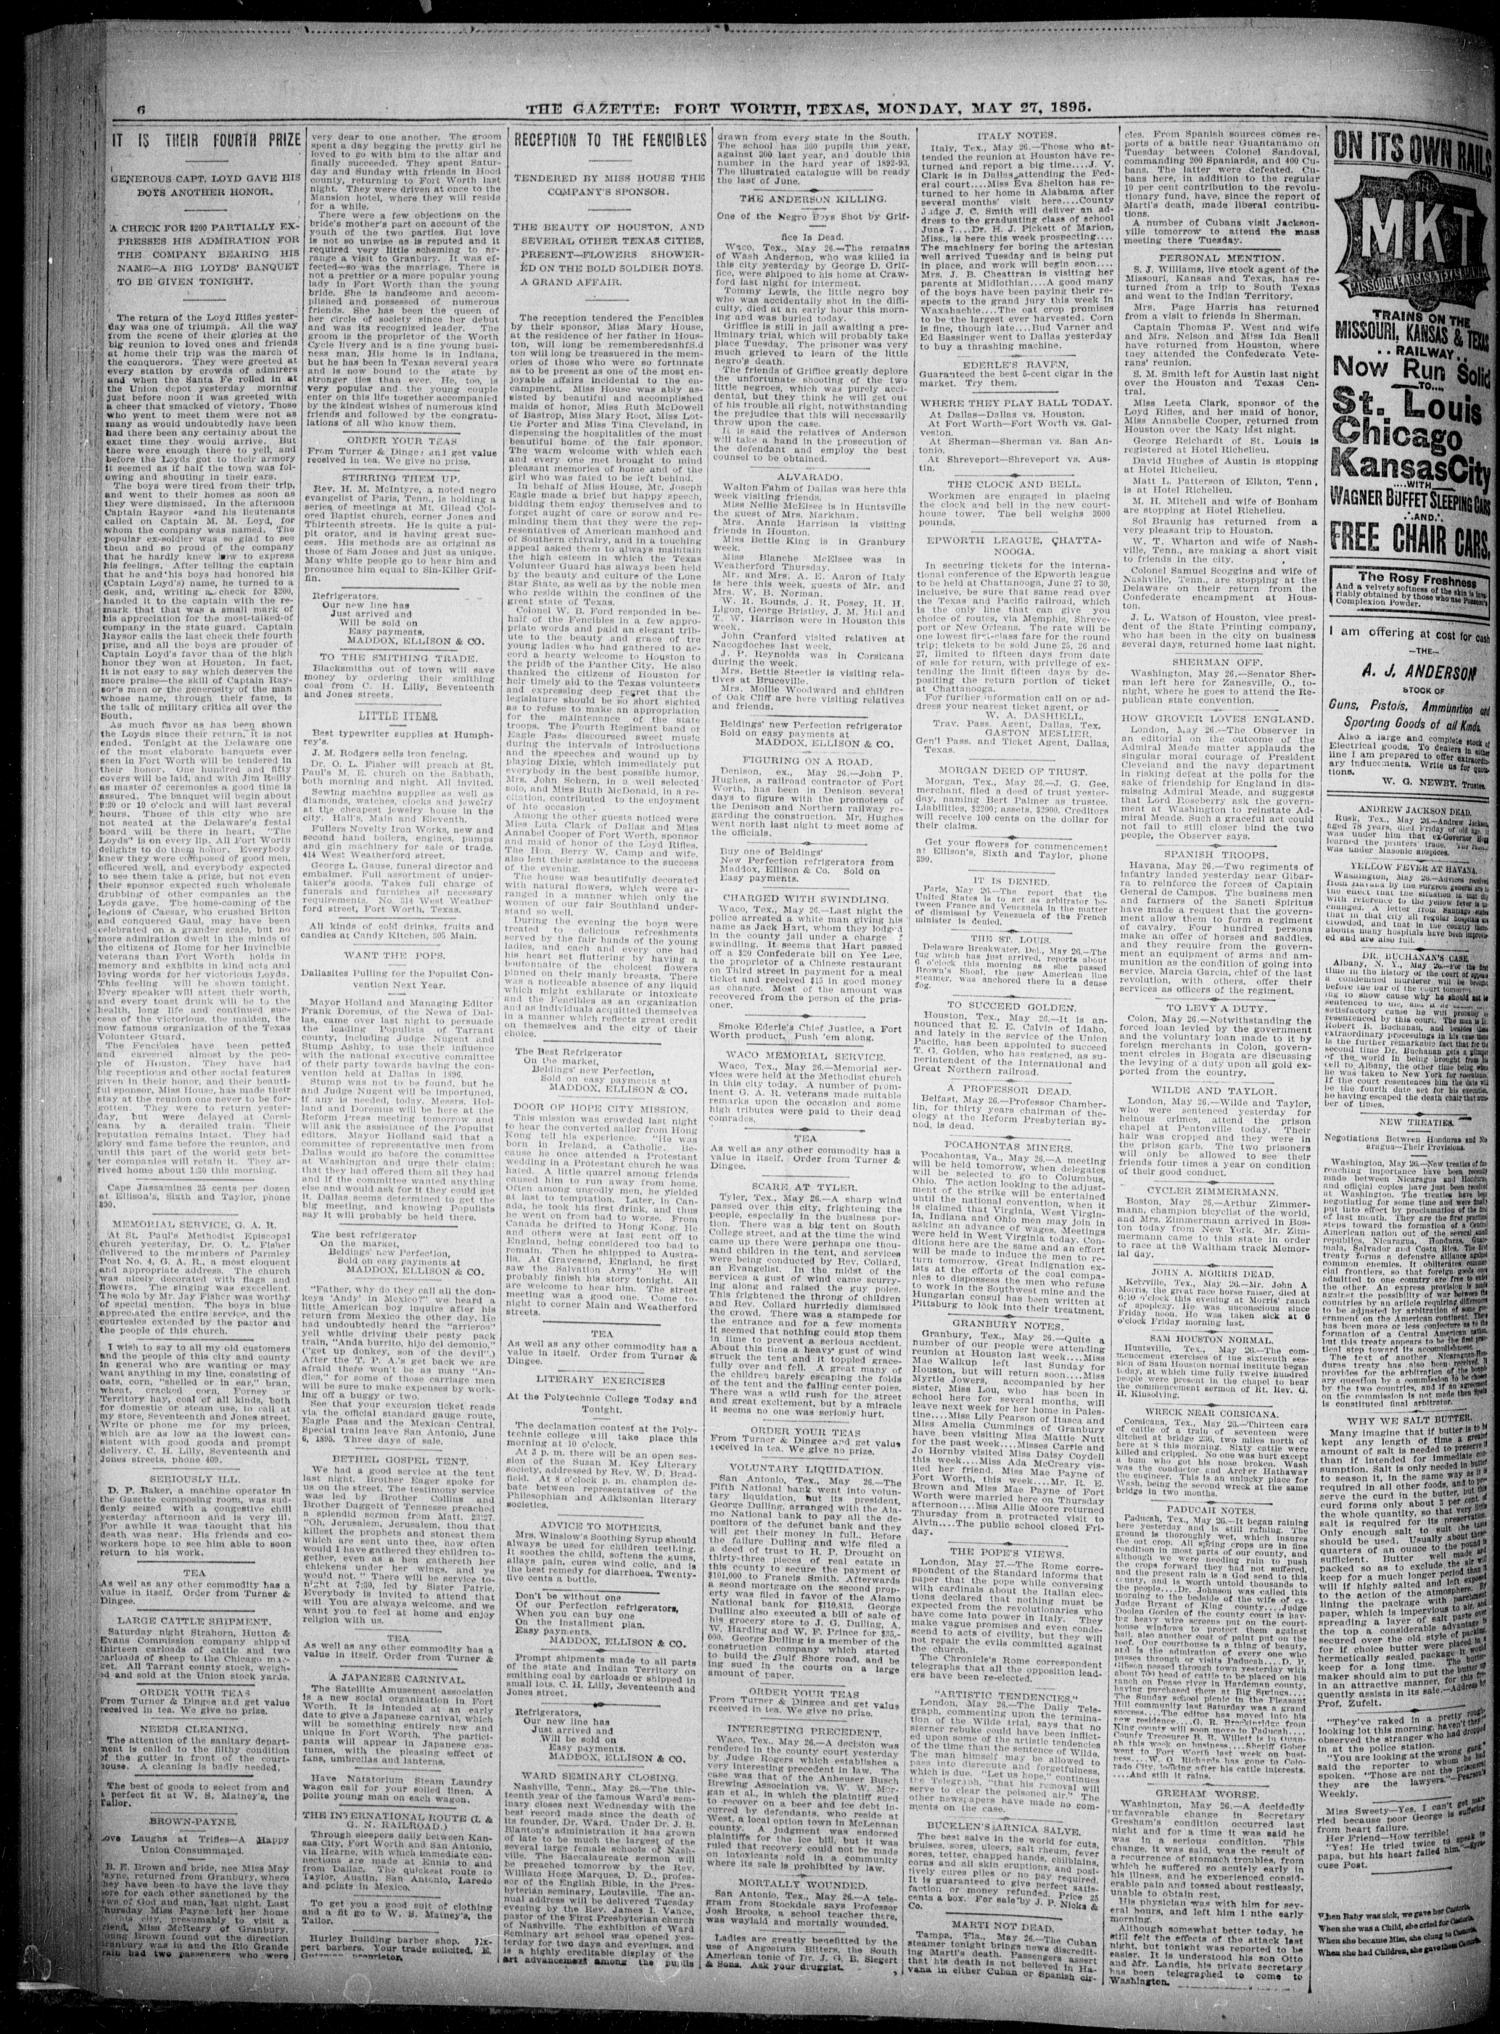 Fort Worth Gazette Fort Worth Tex Vol 19 No 183 Ed 1 Monday May 27 1895 Page 6 of 8 The Portal to Texas History